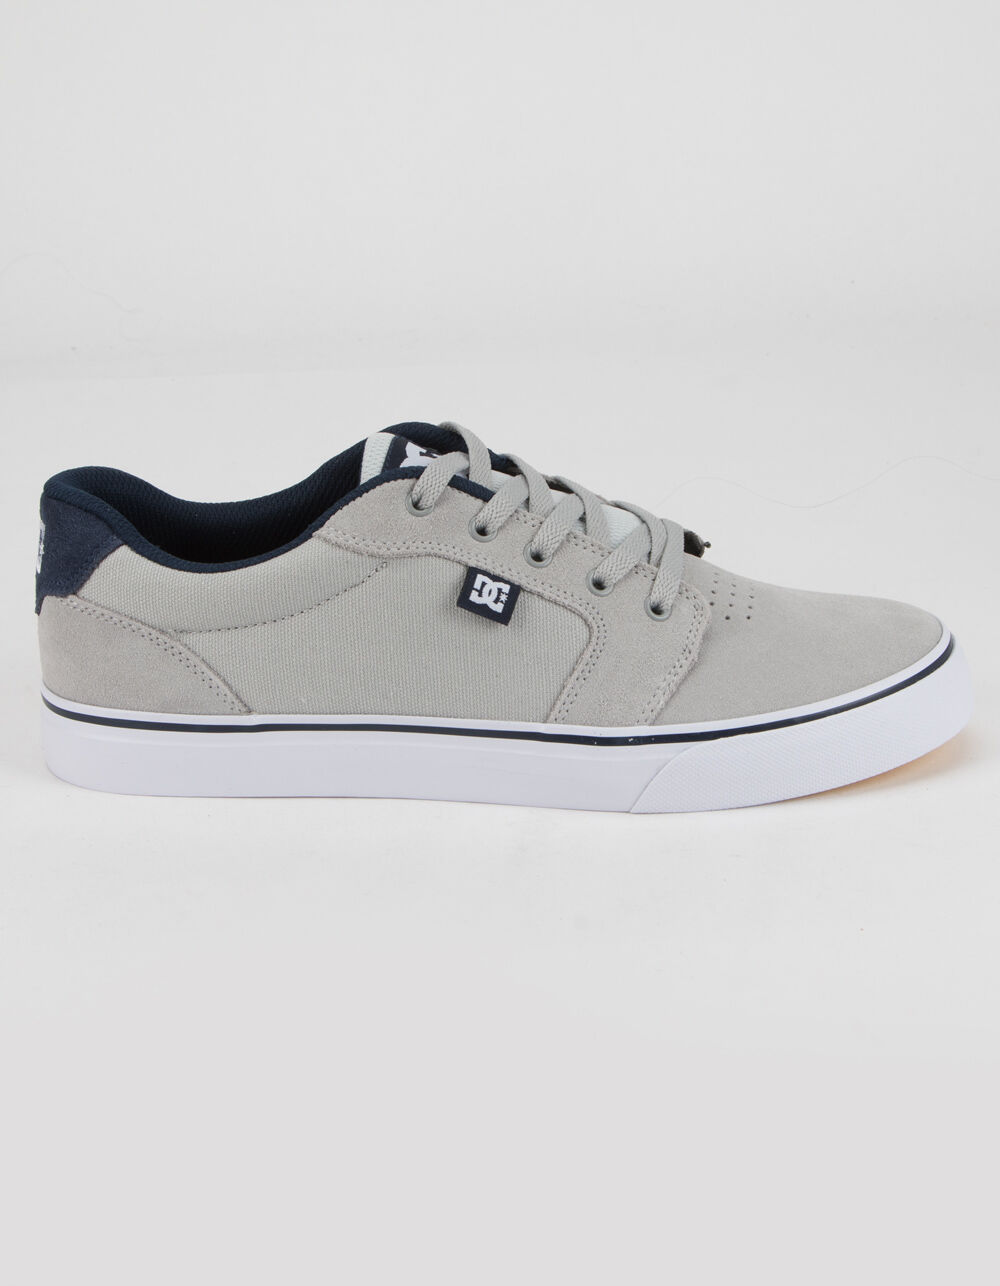 DC SHOES Anvil Gray & Navy Shoes - GRAY/NAVY | Tillys